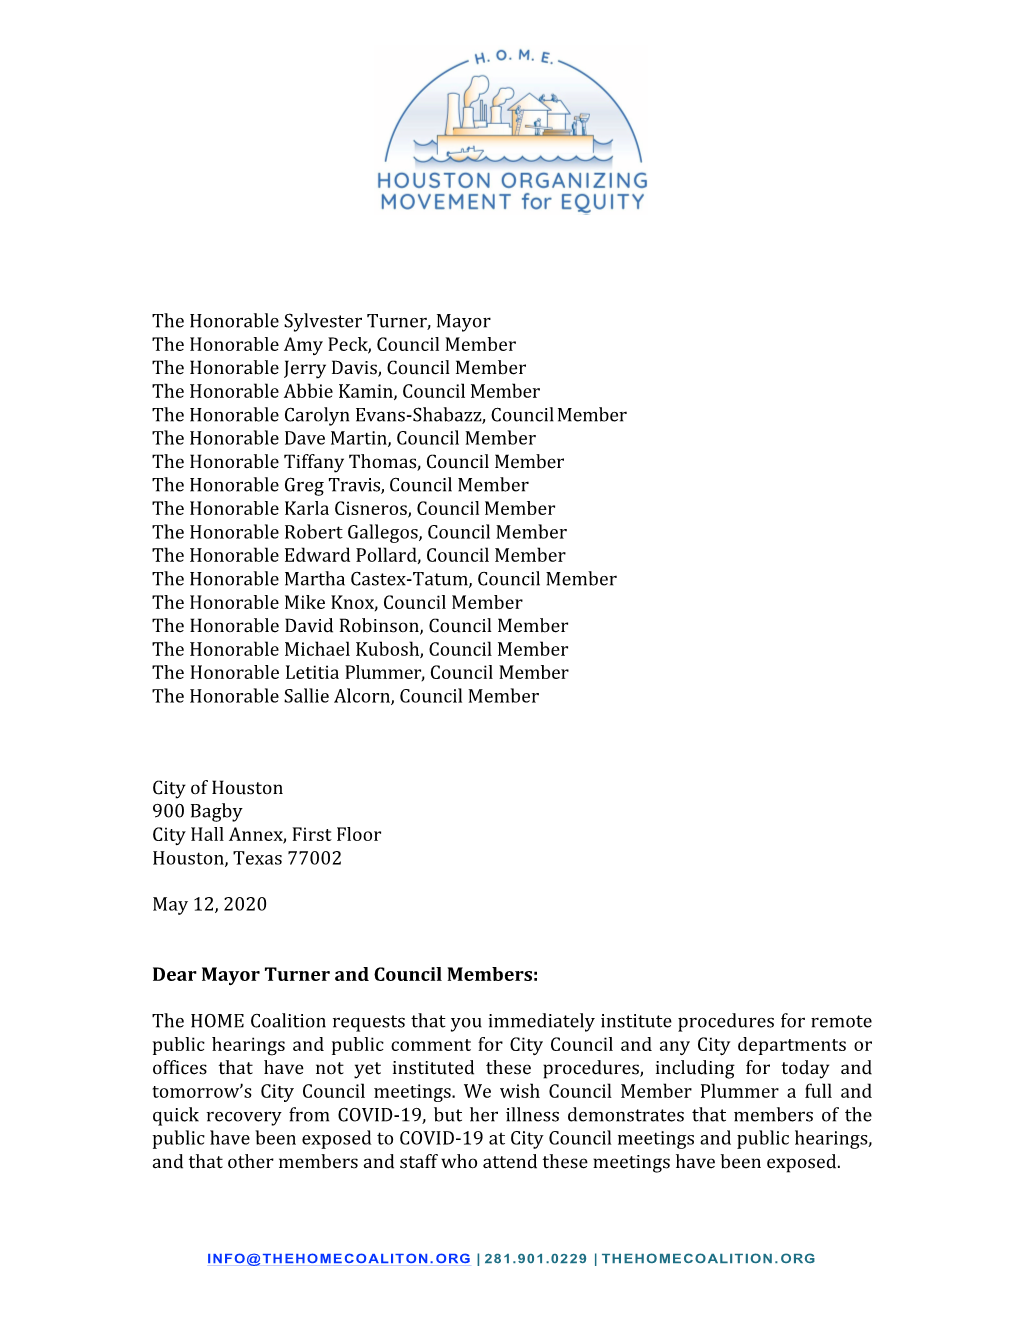 Letter to Houston Mayor and City Council from The